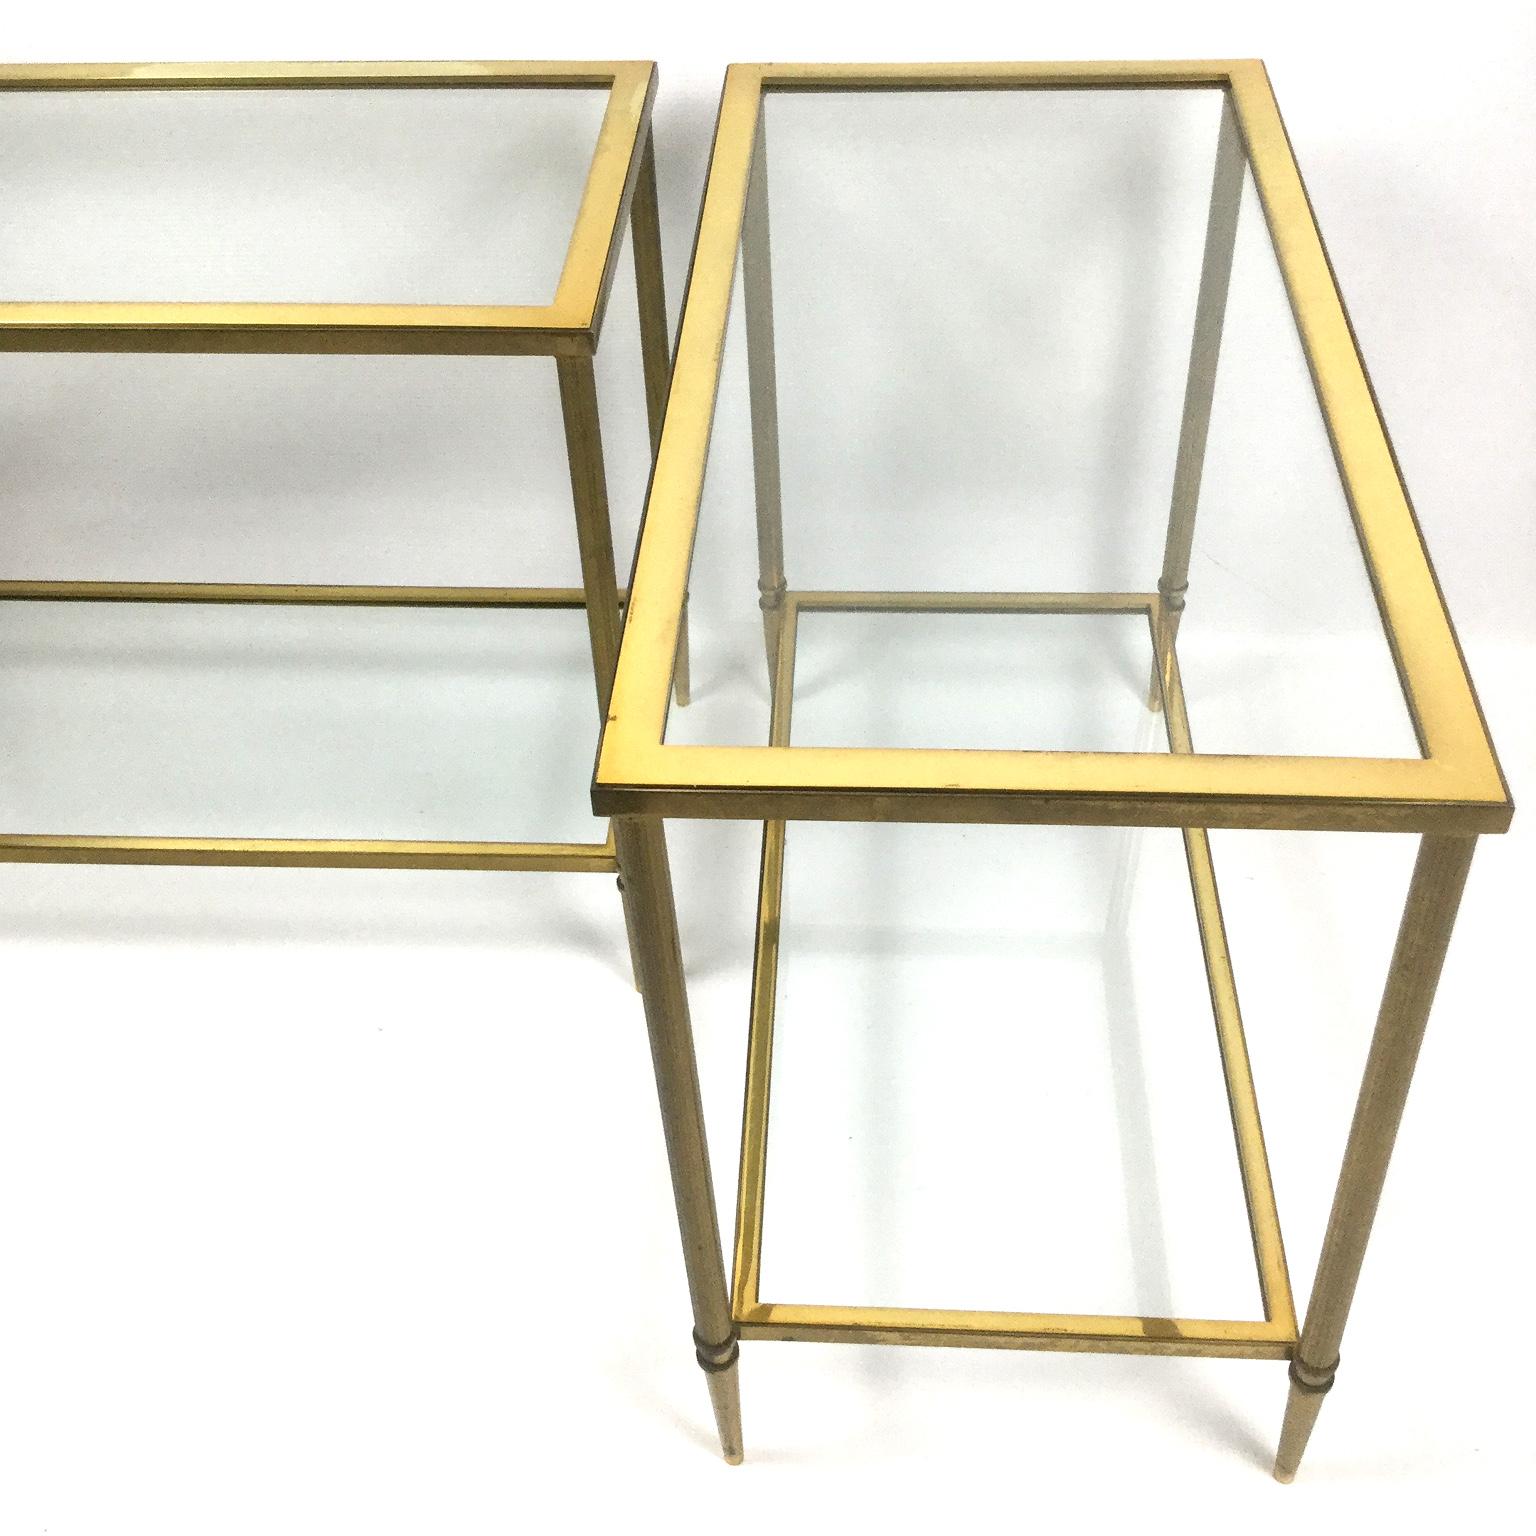 French Pair of Brass Console Tables Attributed to Maison Jansen, France, 1970s